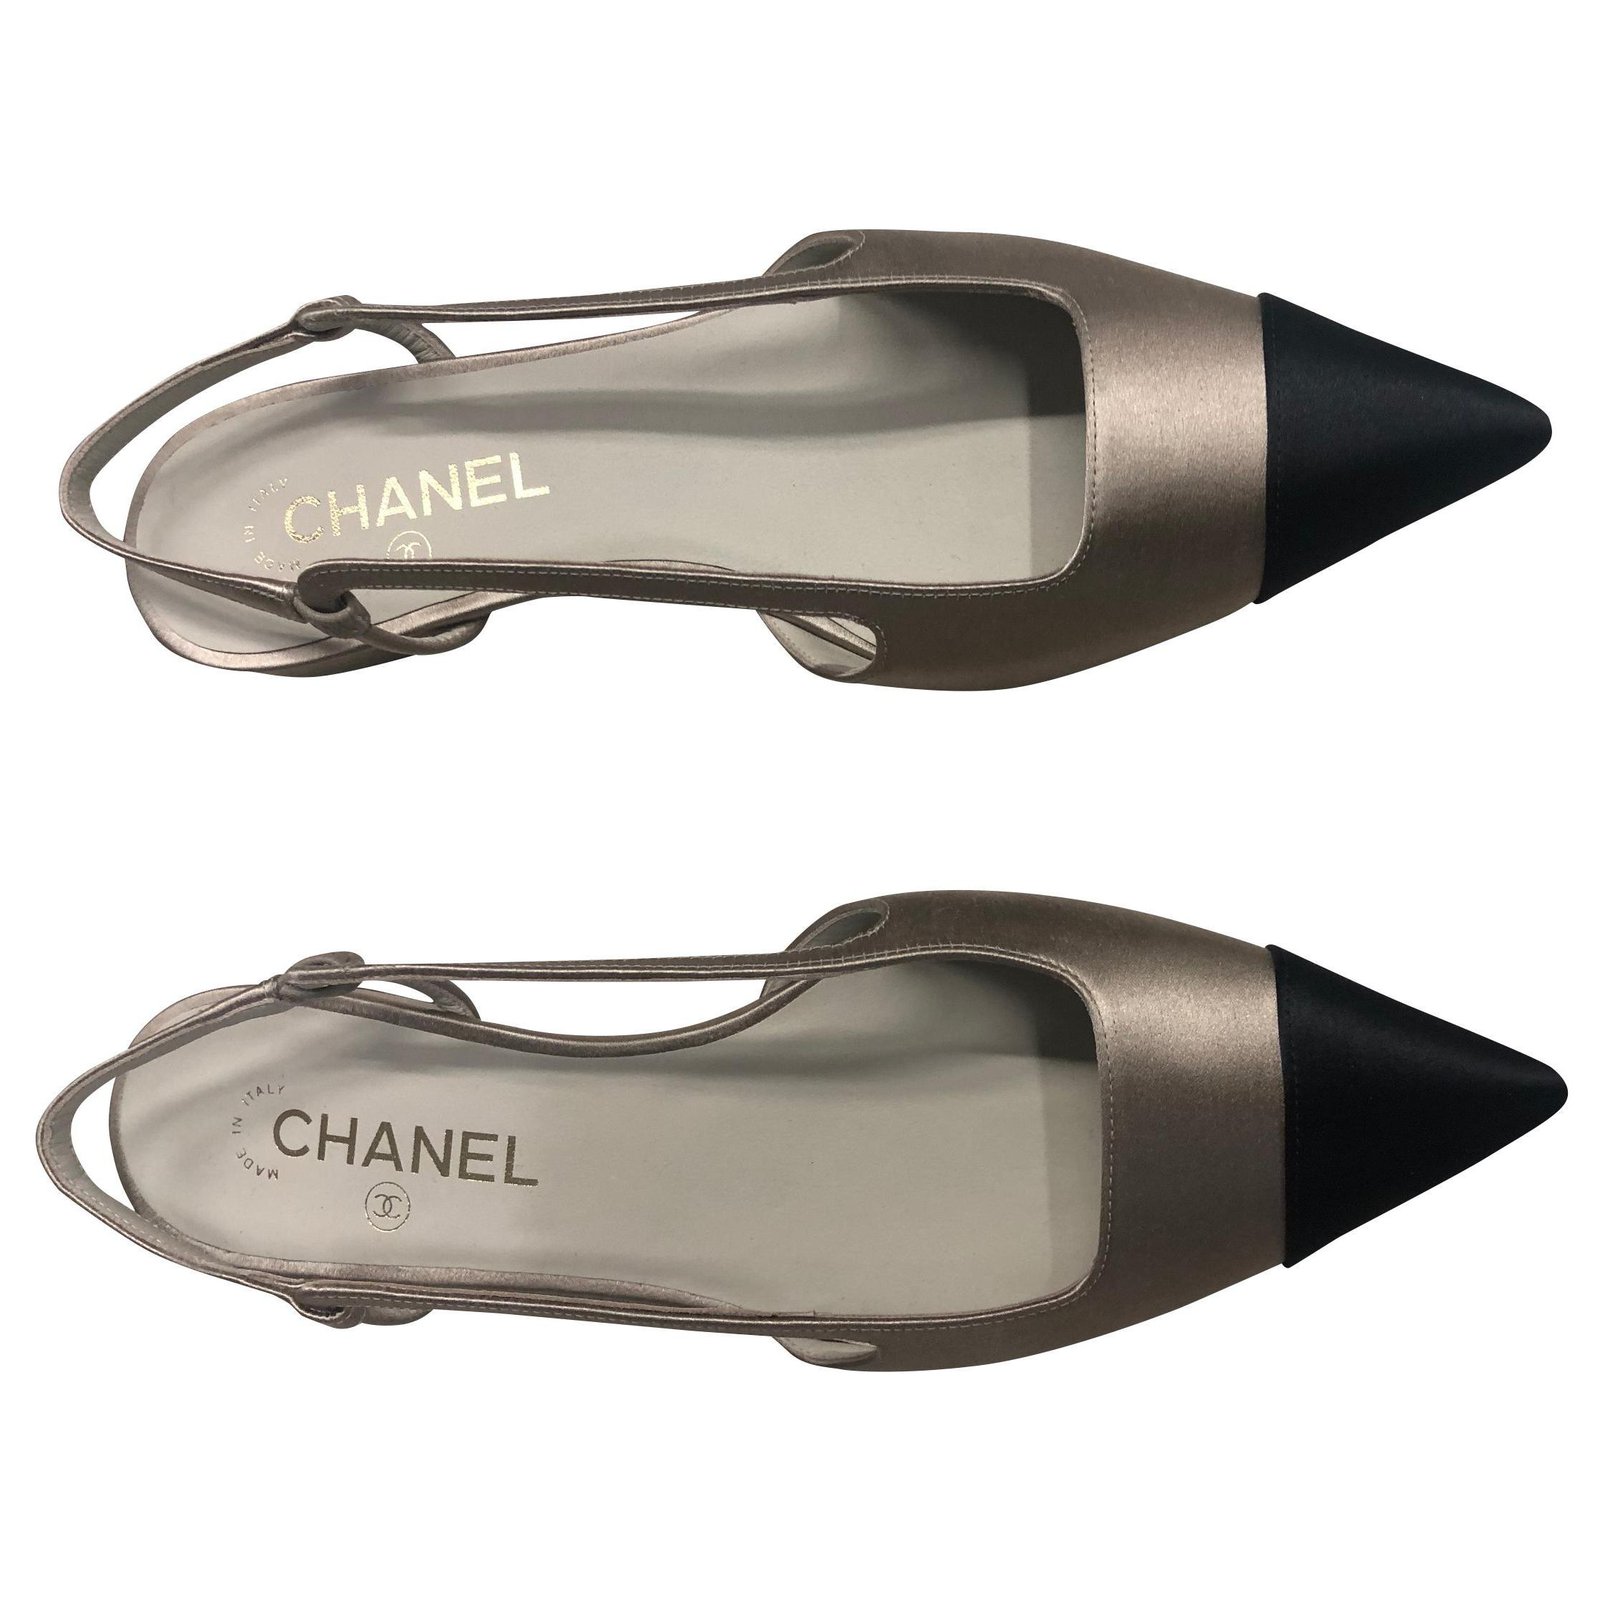 Slingback leather ballet flats Chanel Beige size 37 EU in Leather - 35953062